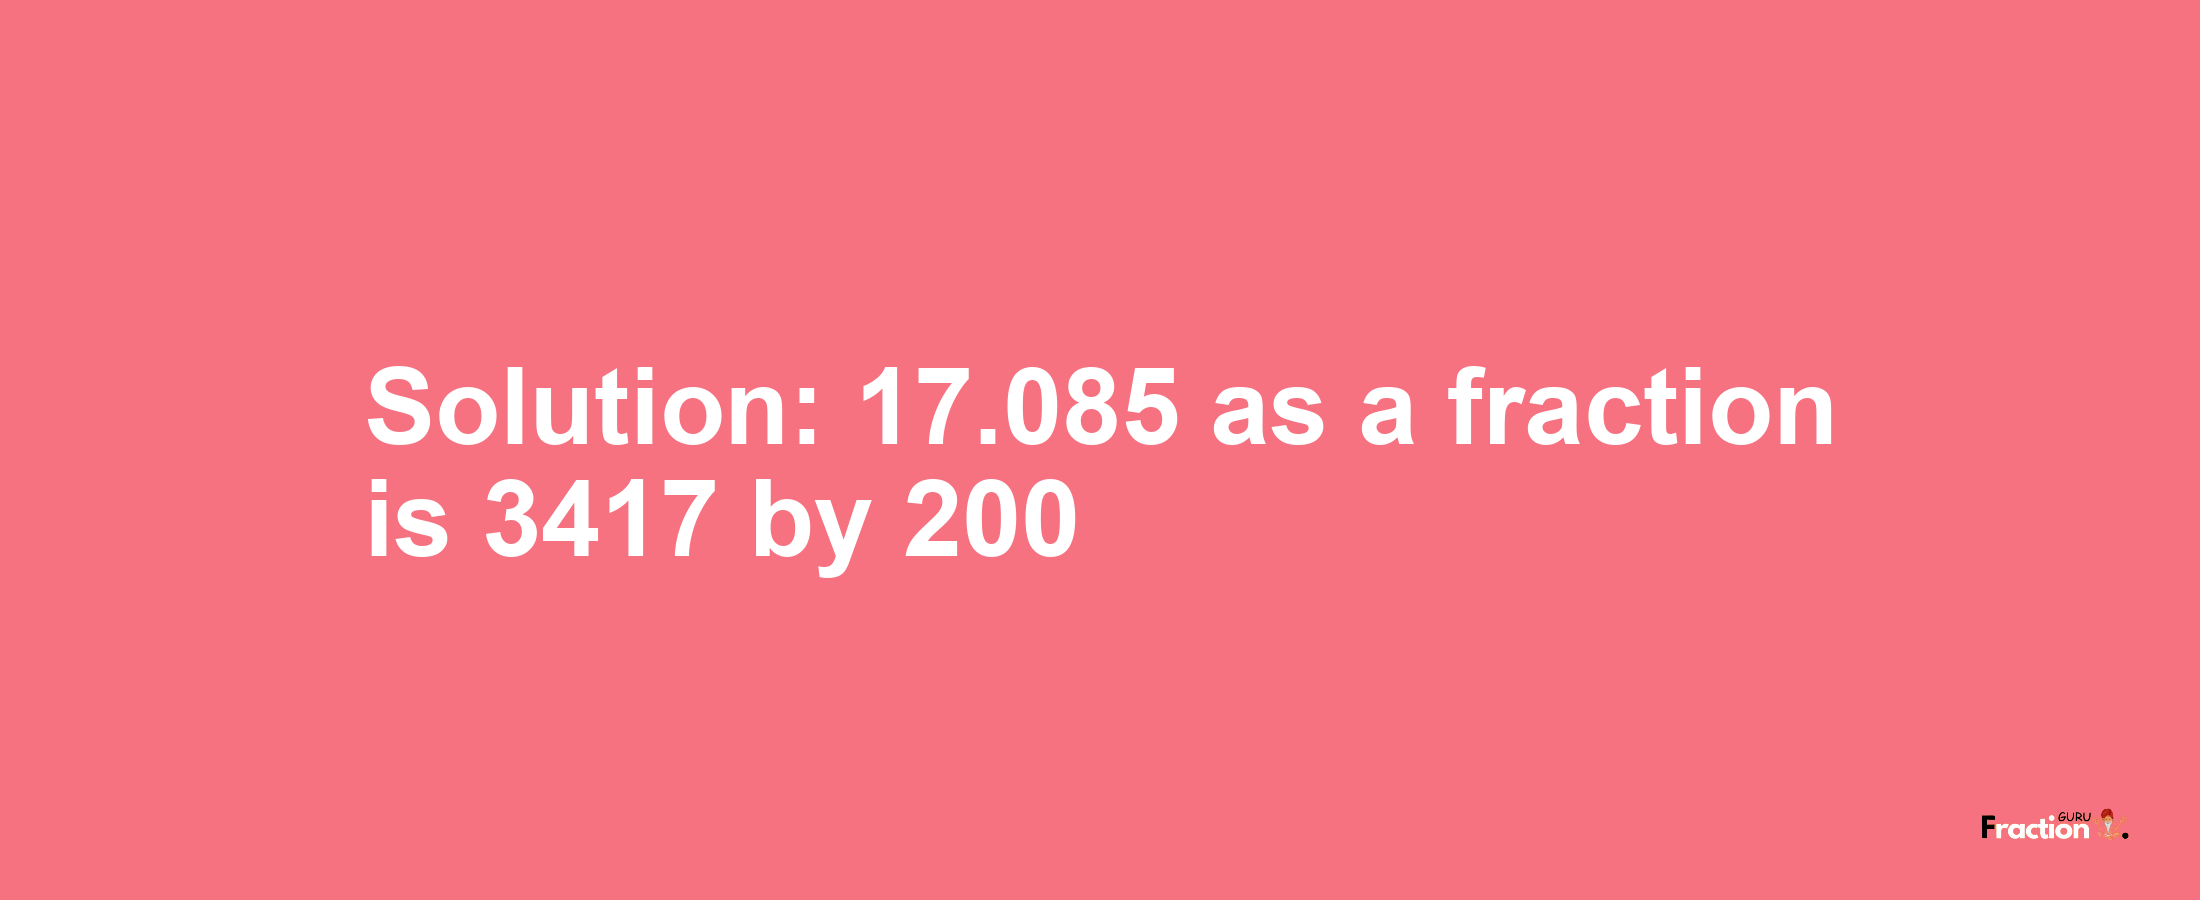 Solution:17.085 as a fraction is 3417/200